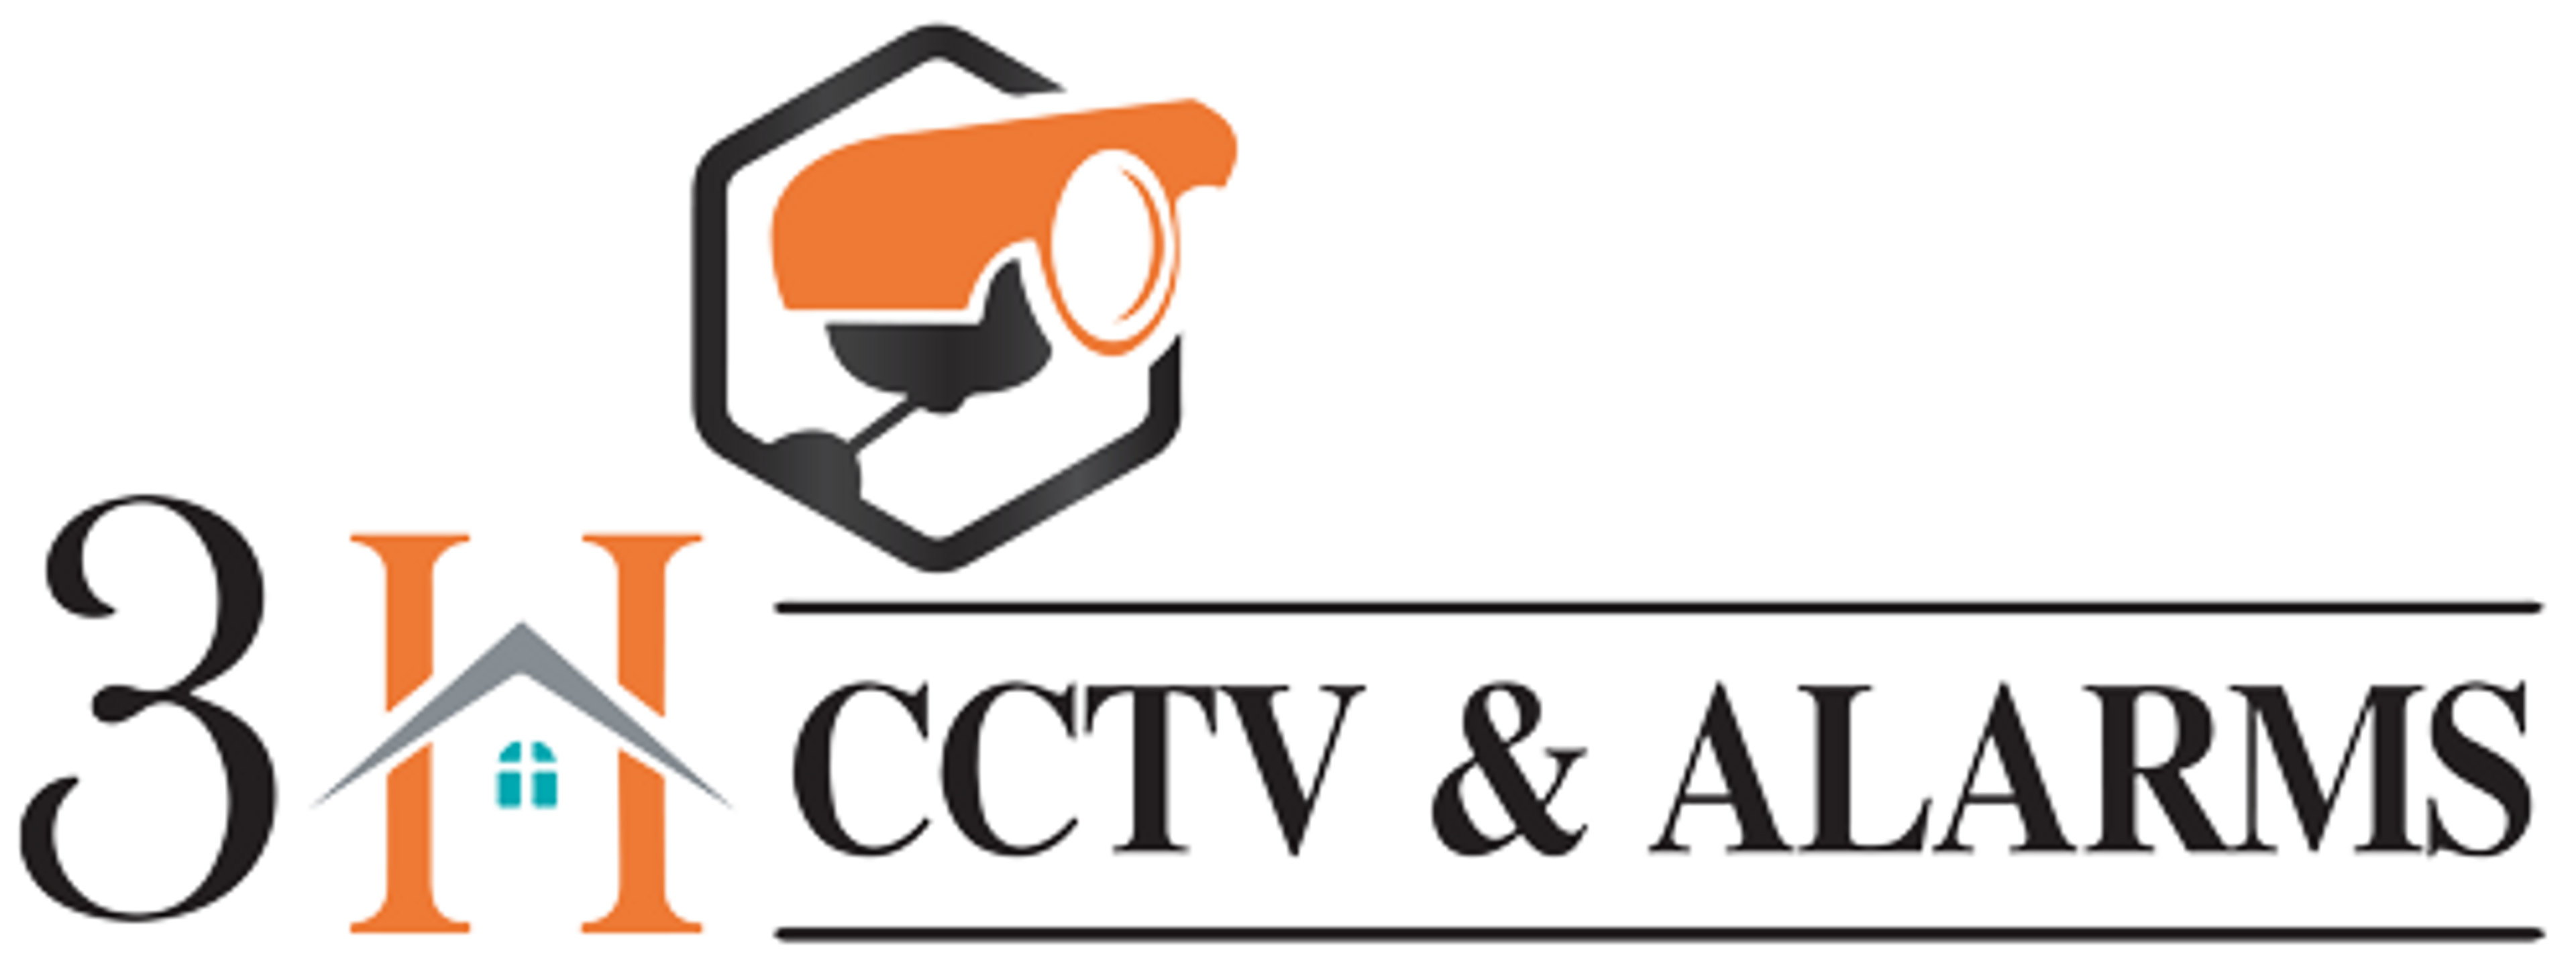 Recent project we worked on for 3HCCTV